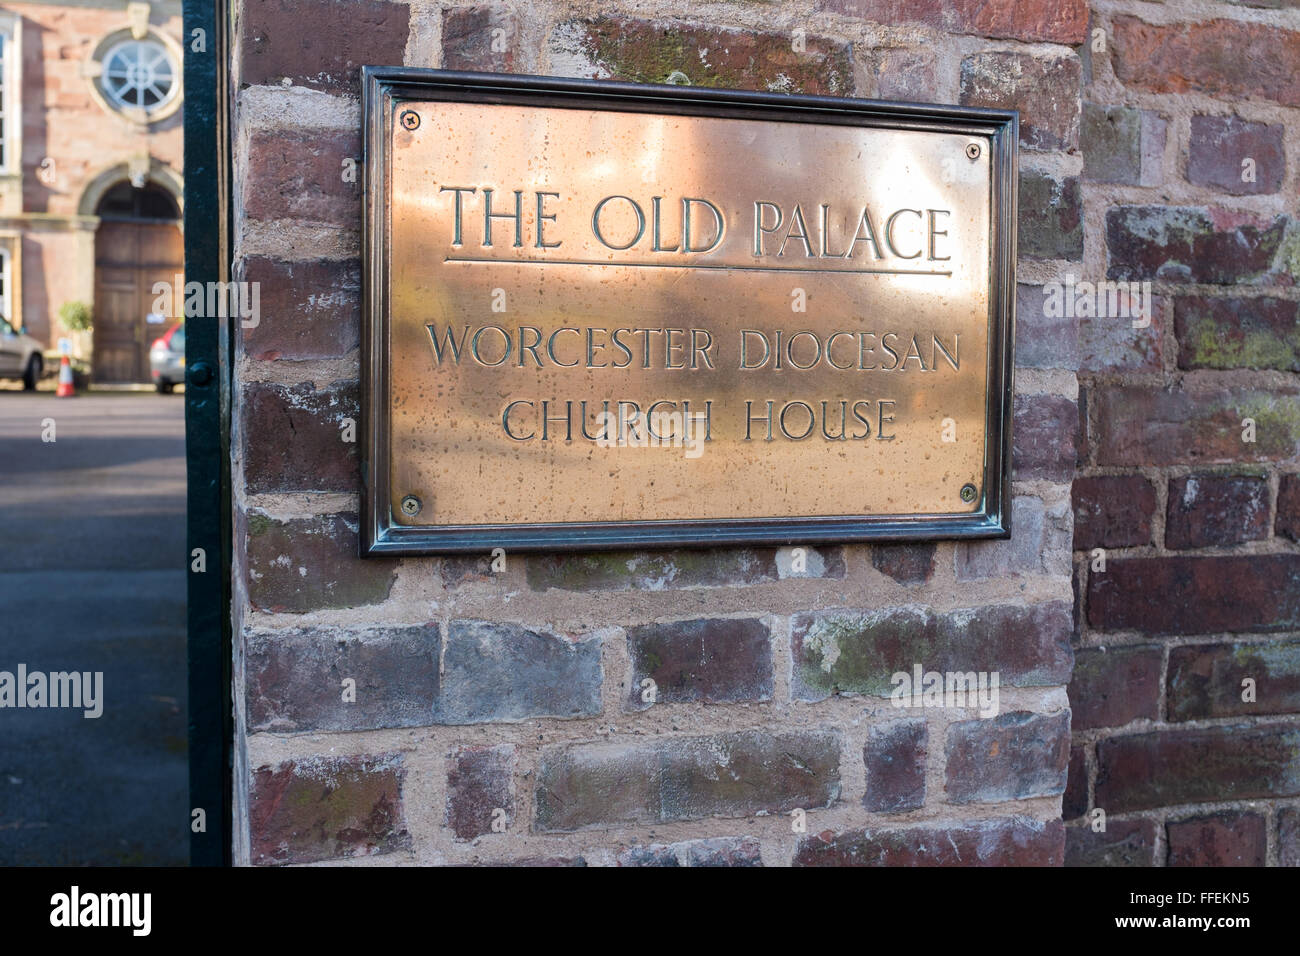 Brass plaque at the entrance to The Old Palace, Worcester Diosesan Church House Stock Photo